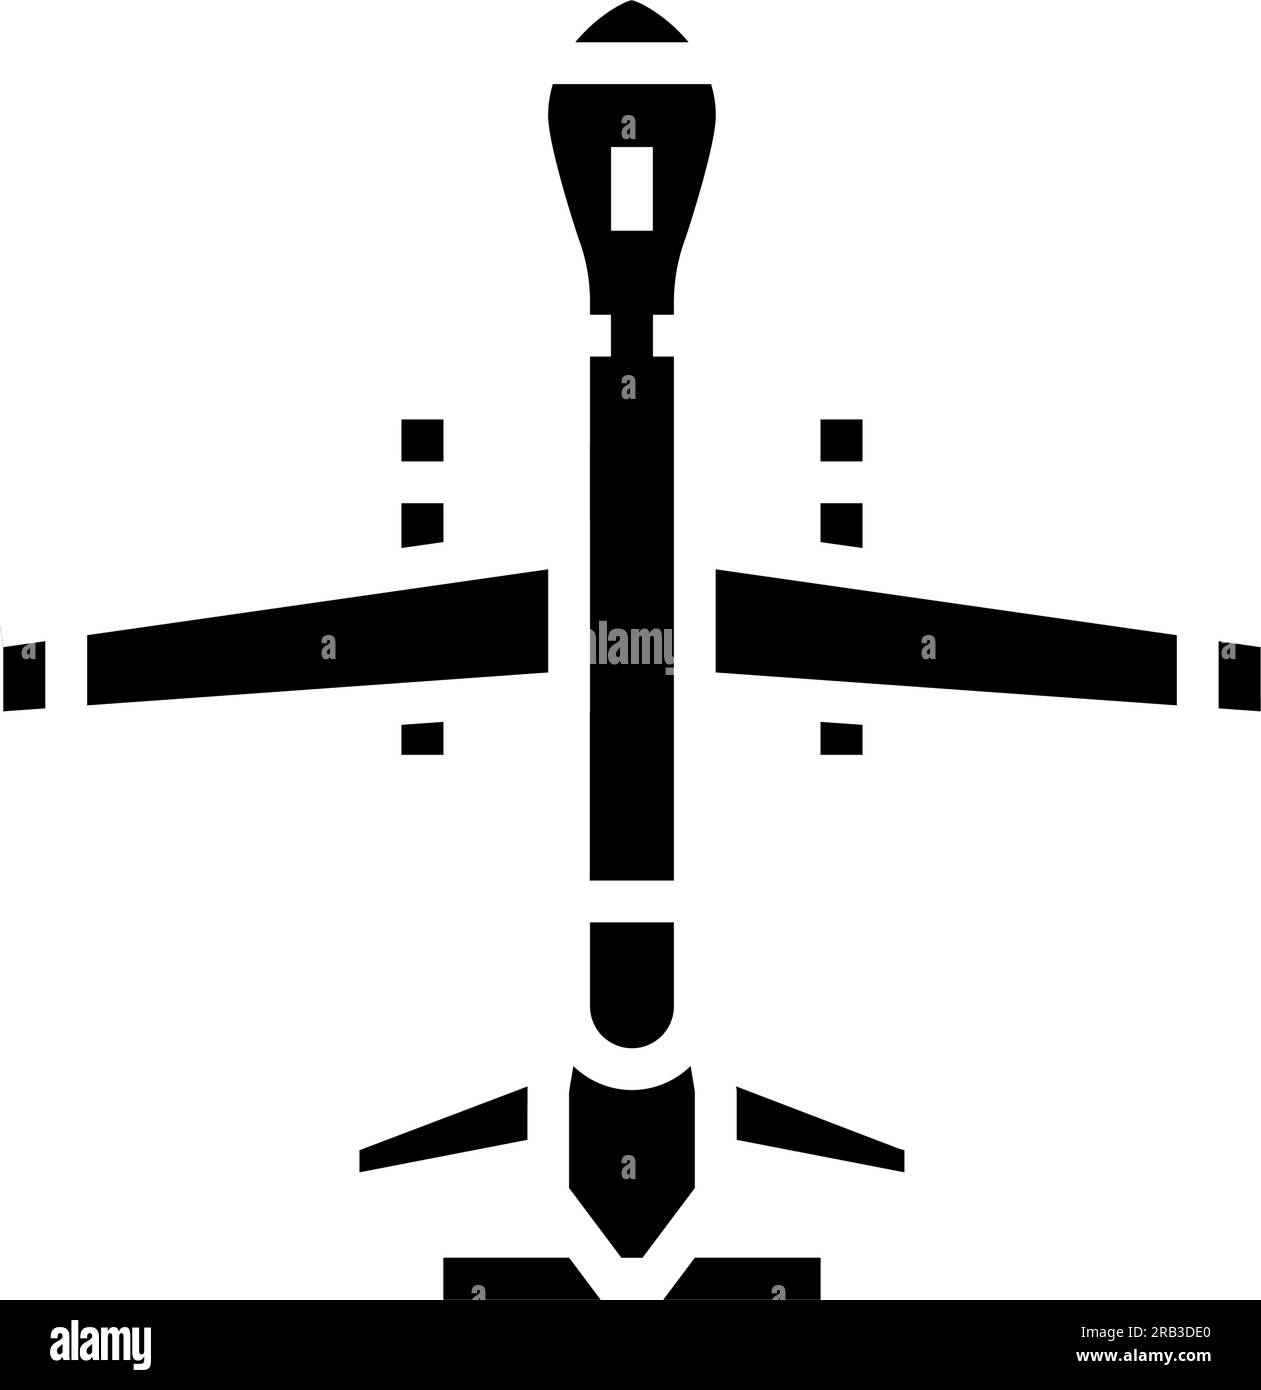 unmanned aerial vehicle aeronautical engineer glyph icon vector illustration Stock Vector